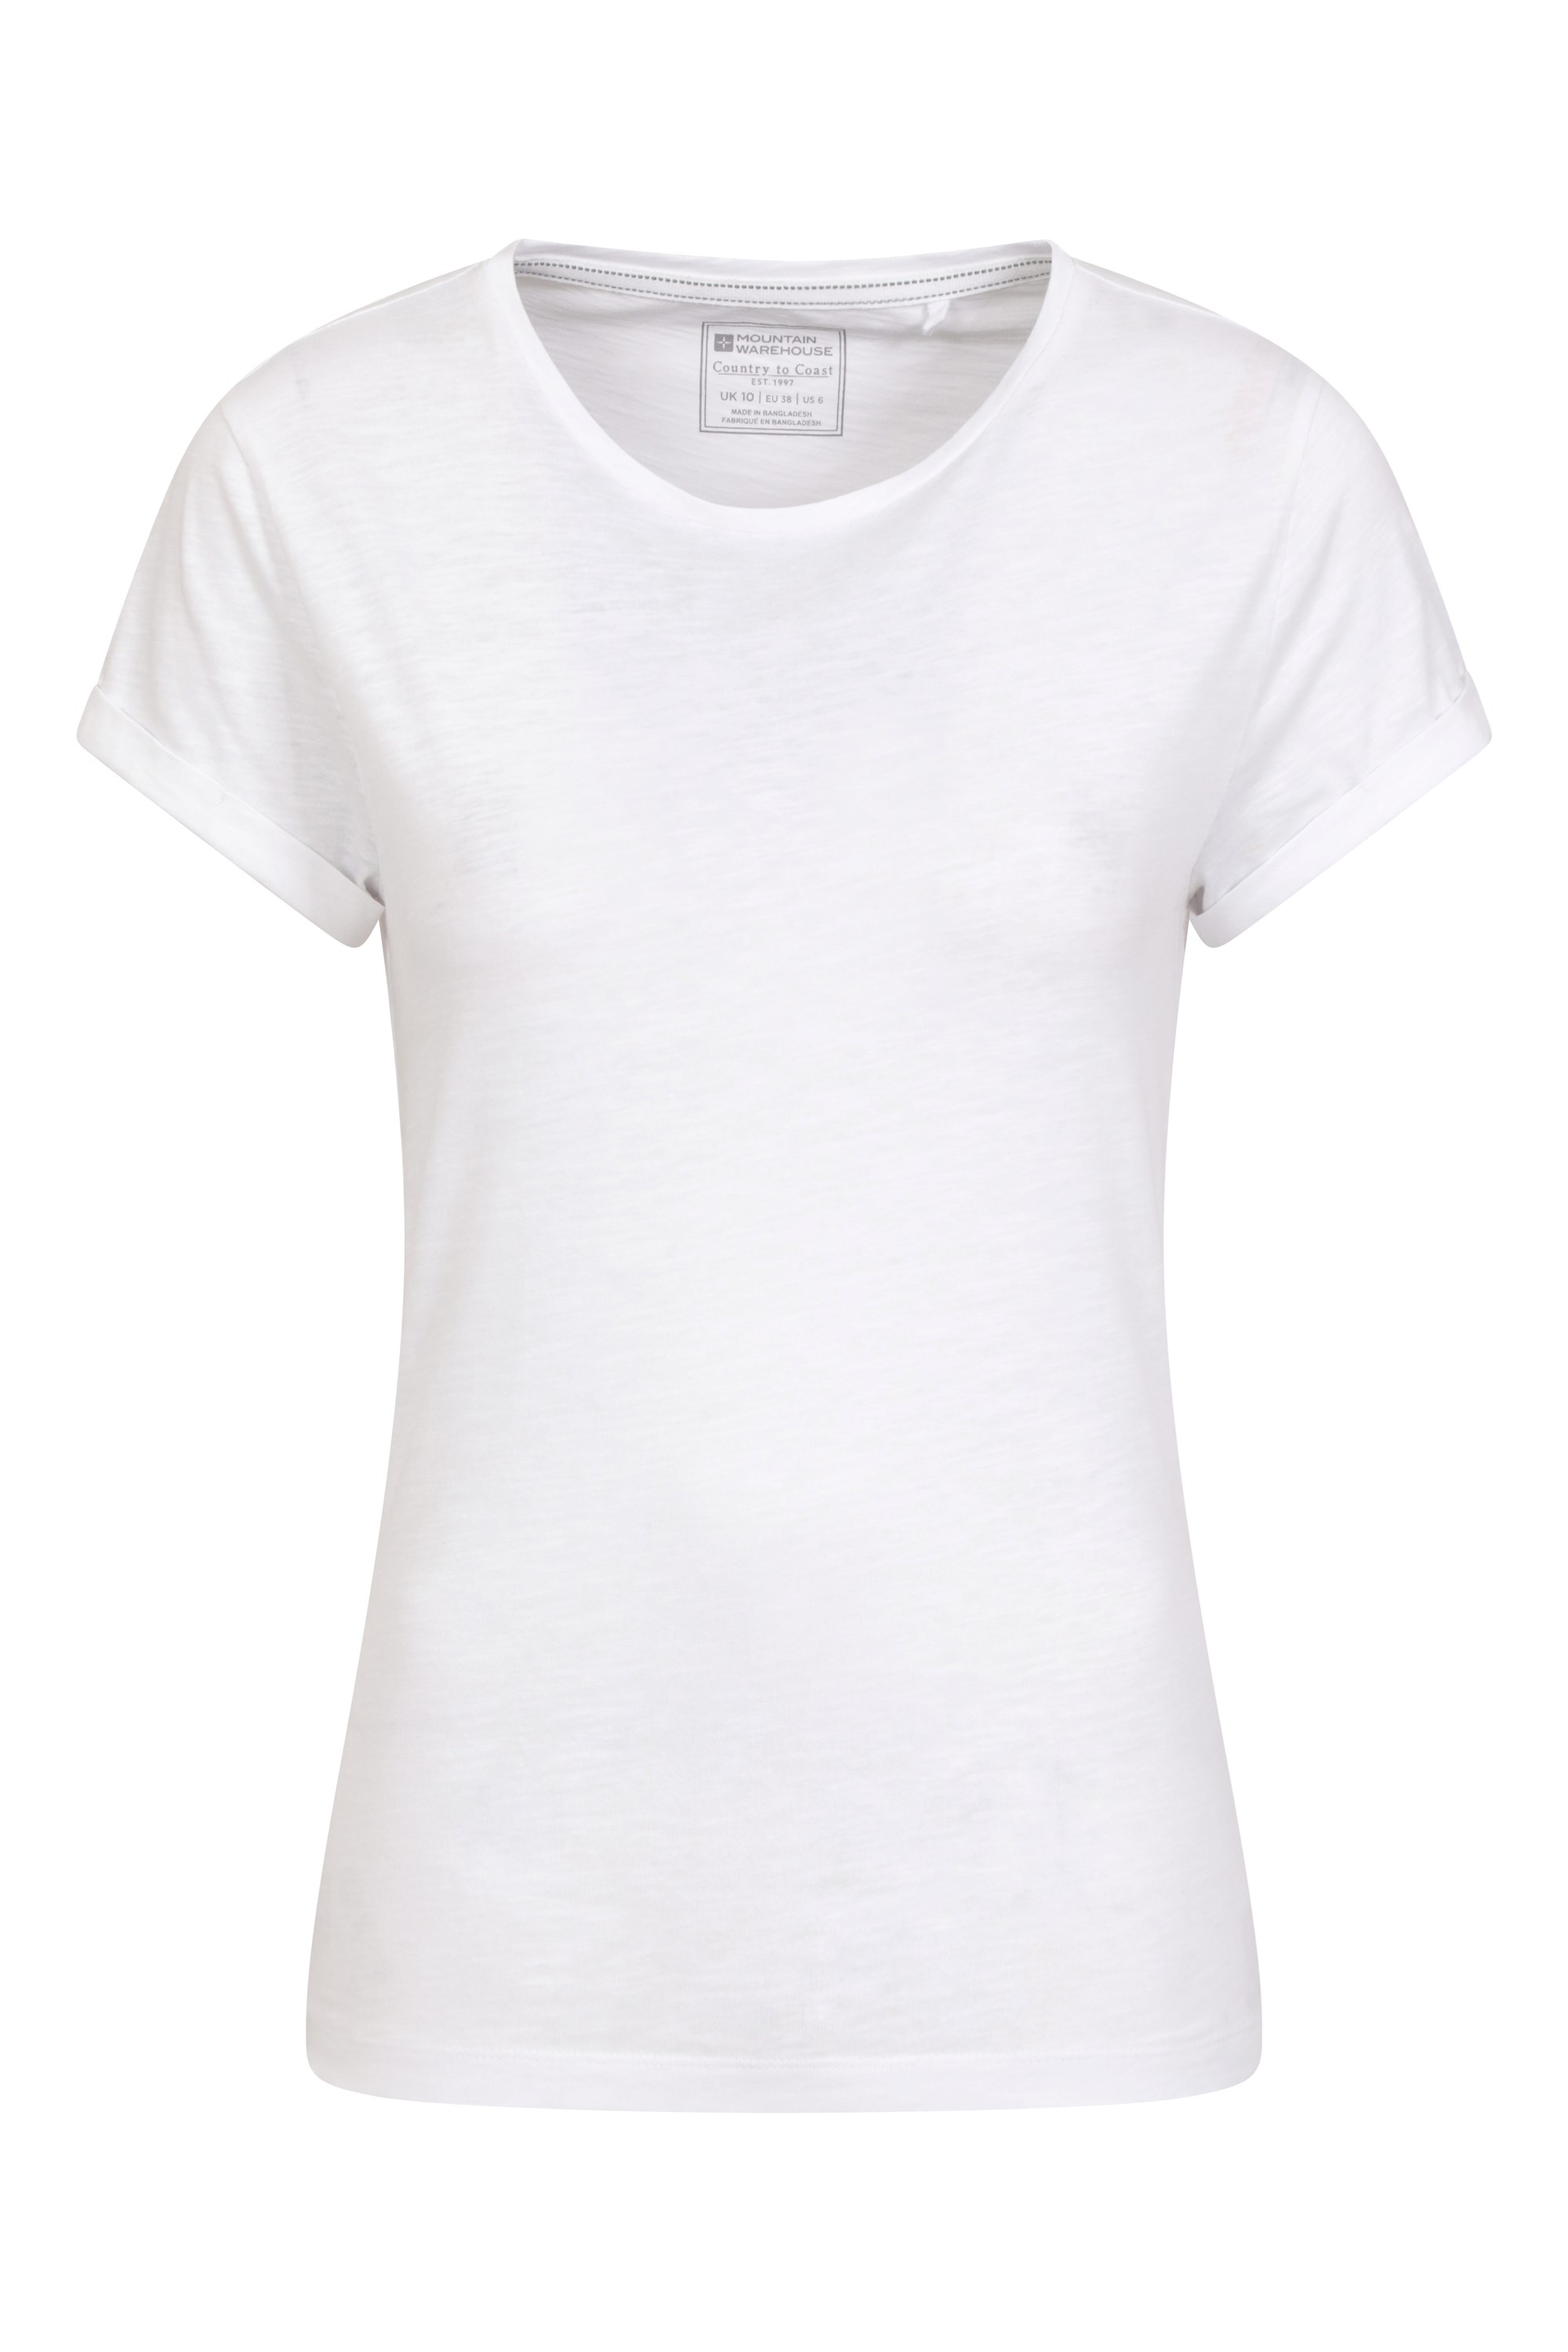 Mountain Warehouse Bude Womens Relaxed Fit T-Shirt - White | Size 16